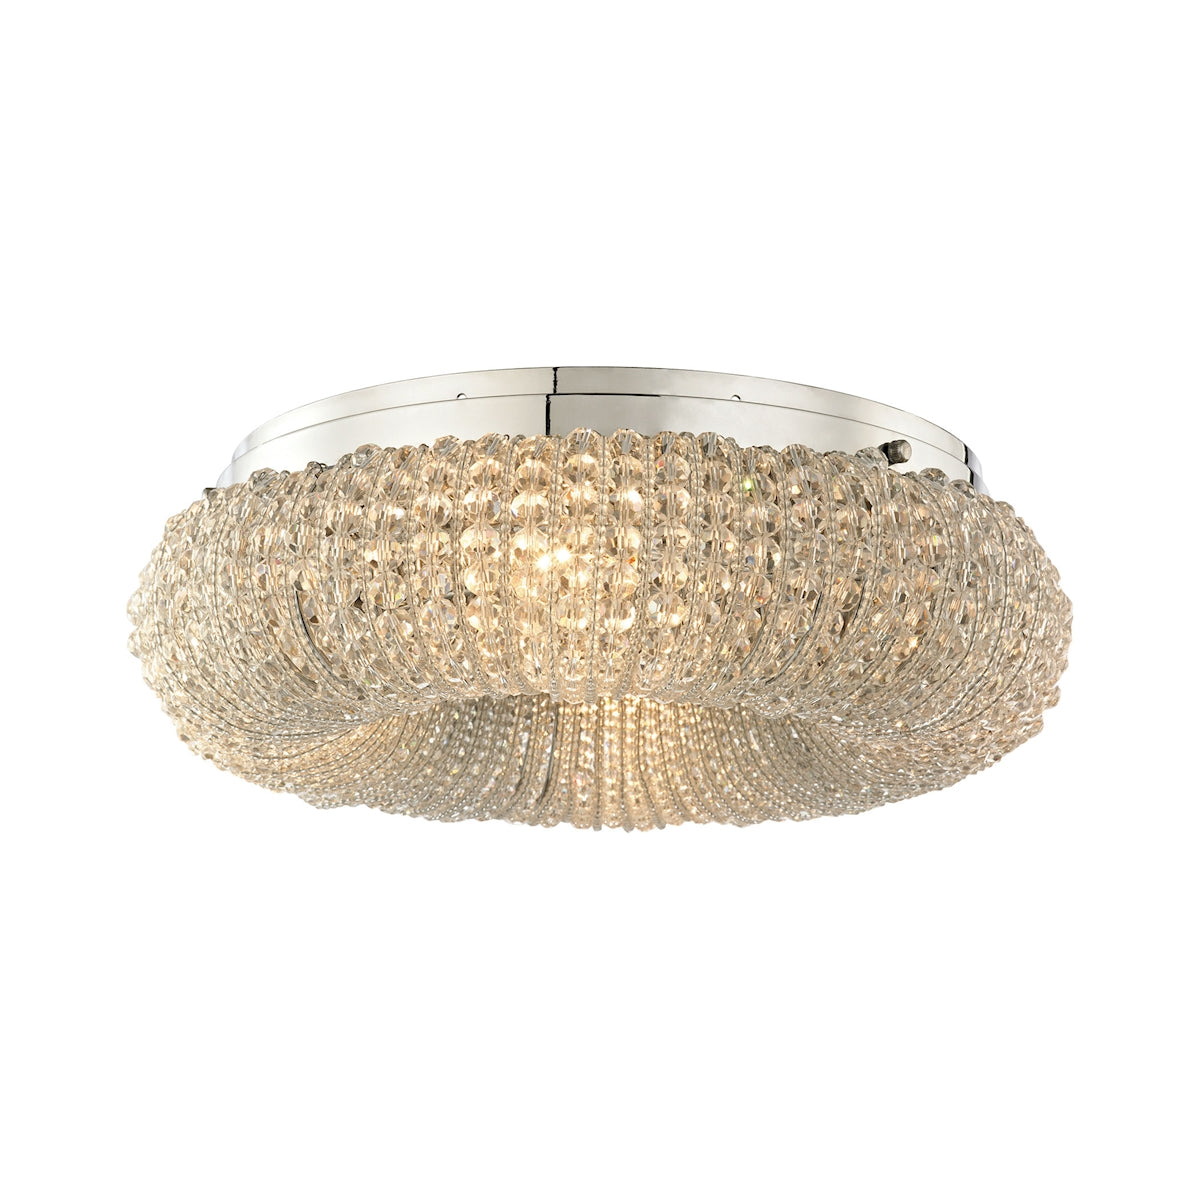 ELK Lighting 45290/4 - Crystal Ring 13" Wide 4-Light Semi Flush in Chrome with Clear Crystal Beads